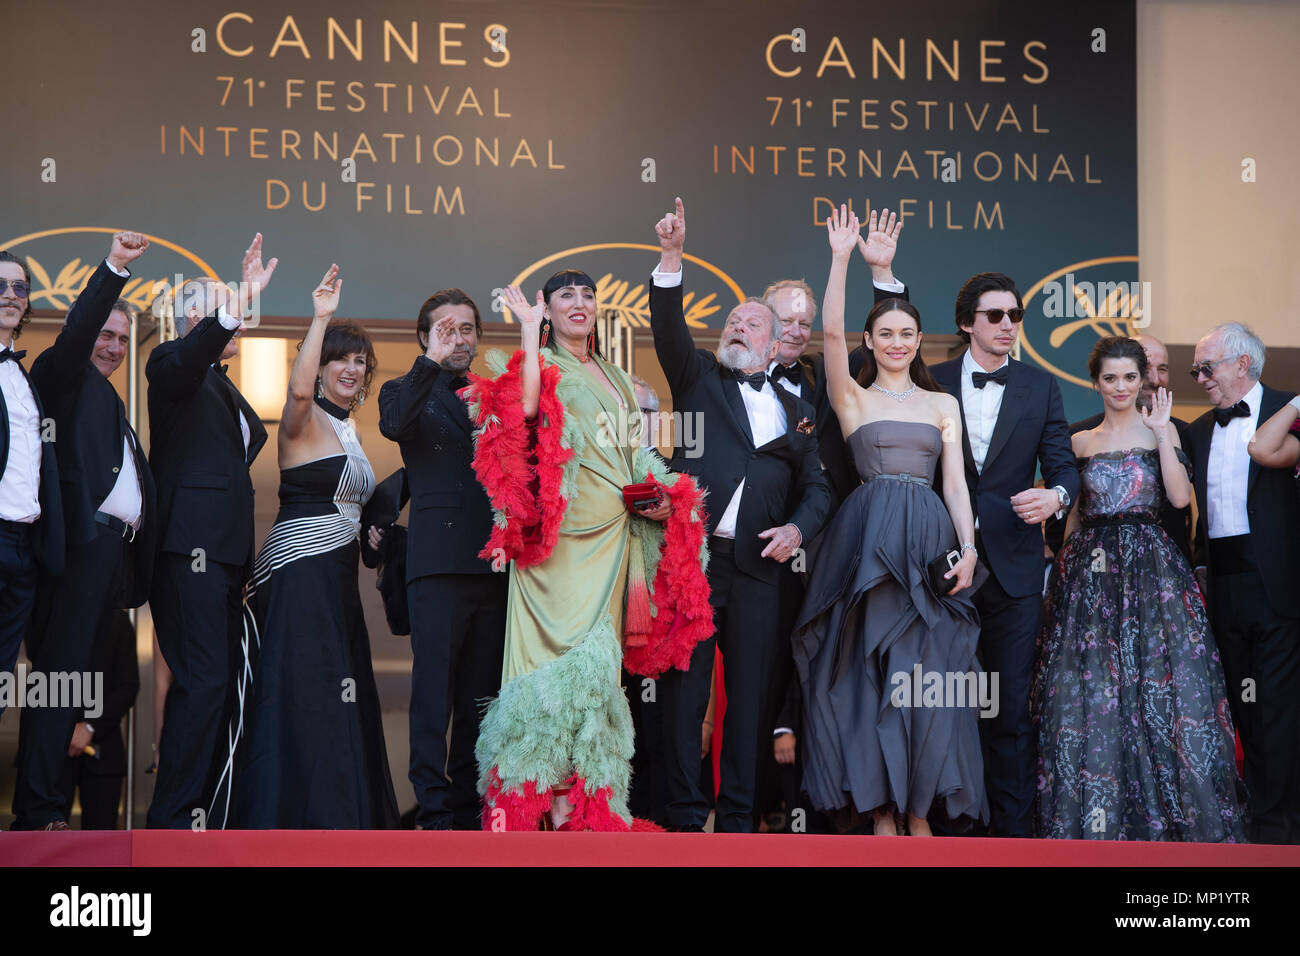 CANNES, FRANCE - MAY 19: Oscar Jaenada, Sergi Lopez, Tony Grisoni, Mariela Besuievsky, Jordi Molla, Rossy de Palma, Terry Gilliam, Stellan Skarsgard, Olga Kurylenko, Adam Driver, Joana Ribeiro and Jonathan Pryce attend at the Closing Ceremony & screening of 'The Man Who Killed Don Quixote' during the 71st annual Cannes Film Festival at Palais des Festivals on May May 19, 2018 in Cannes, France Credit: BTWImages/Alamy Live News Stock Photo